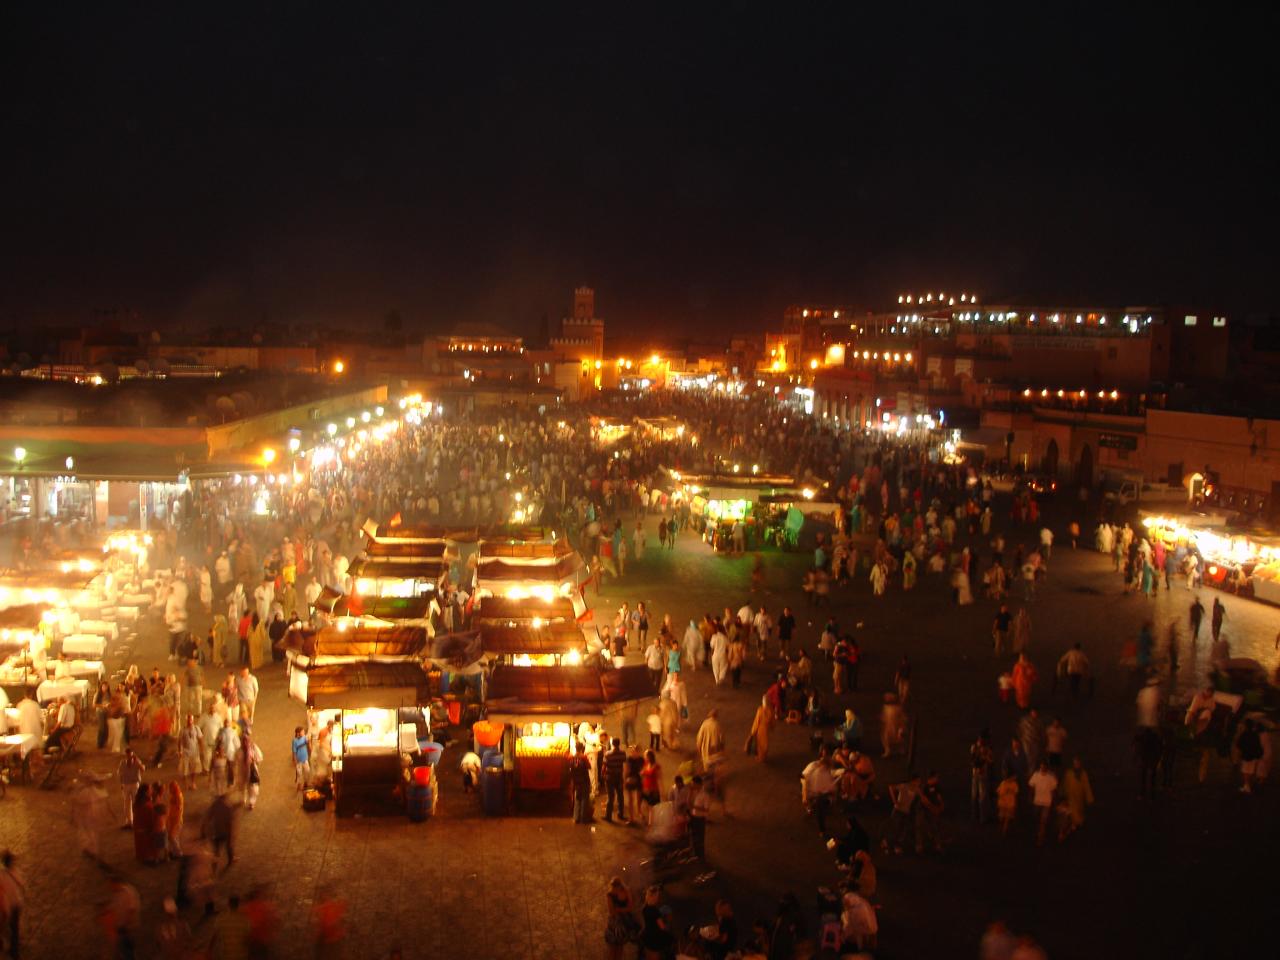 Jemaa el-Fna Square by night in Marrakech